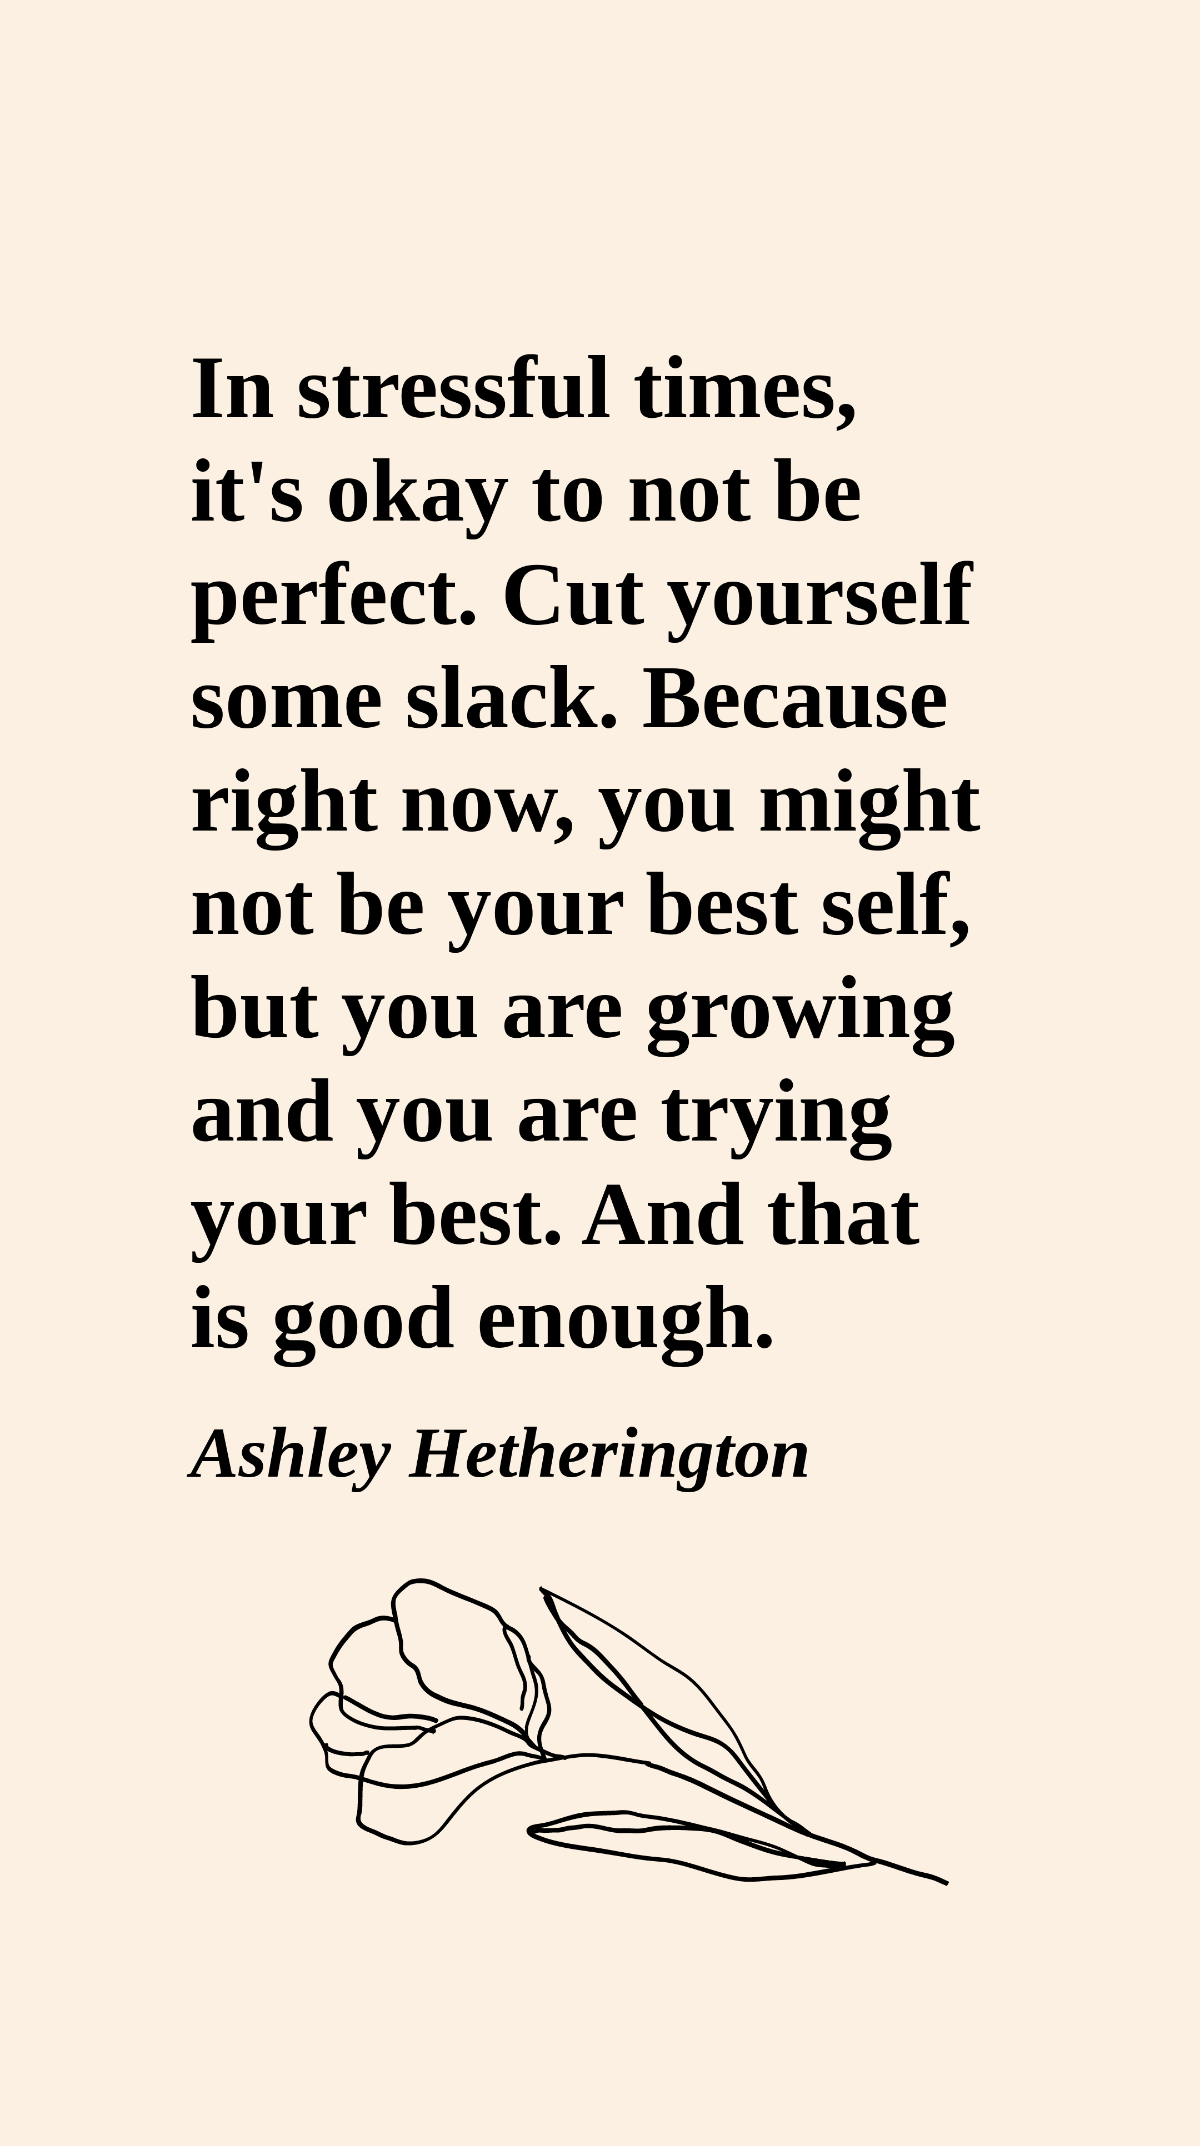 Ashley Hetherington - In stressful times, it's okay to not be perfect. Cut yourself some slack. Because right now, you might not be your best self, but you are growing and you are trying your best. An